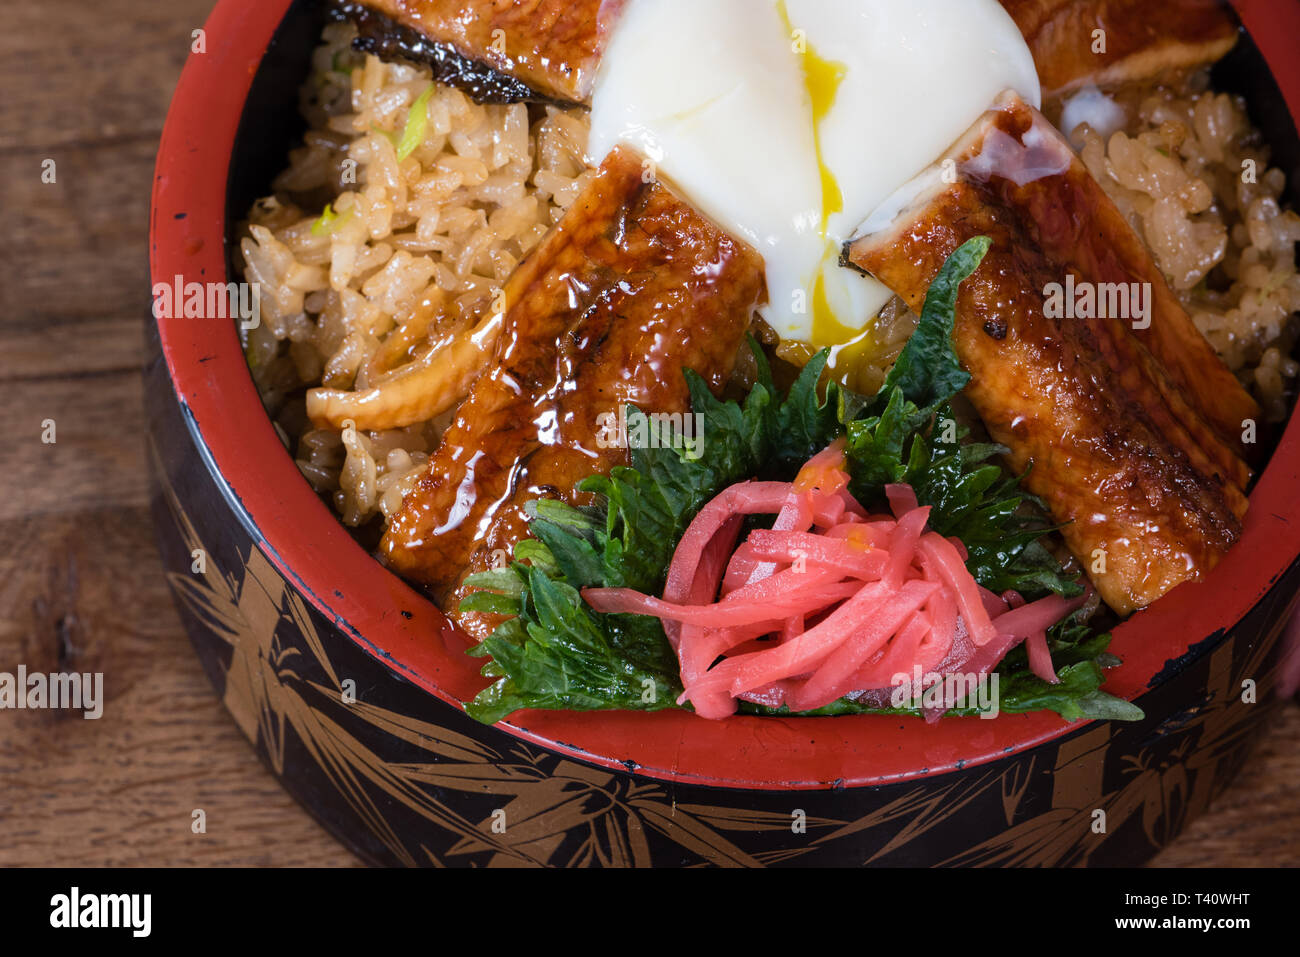 Japanese fusion dish with spicy rice with tamari sauce, roasted eel, egg and red turnip, in a decorated bowl, dark wood table background, details Stock Photo